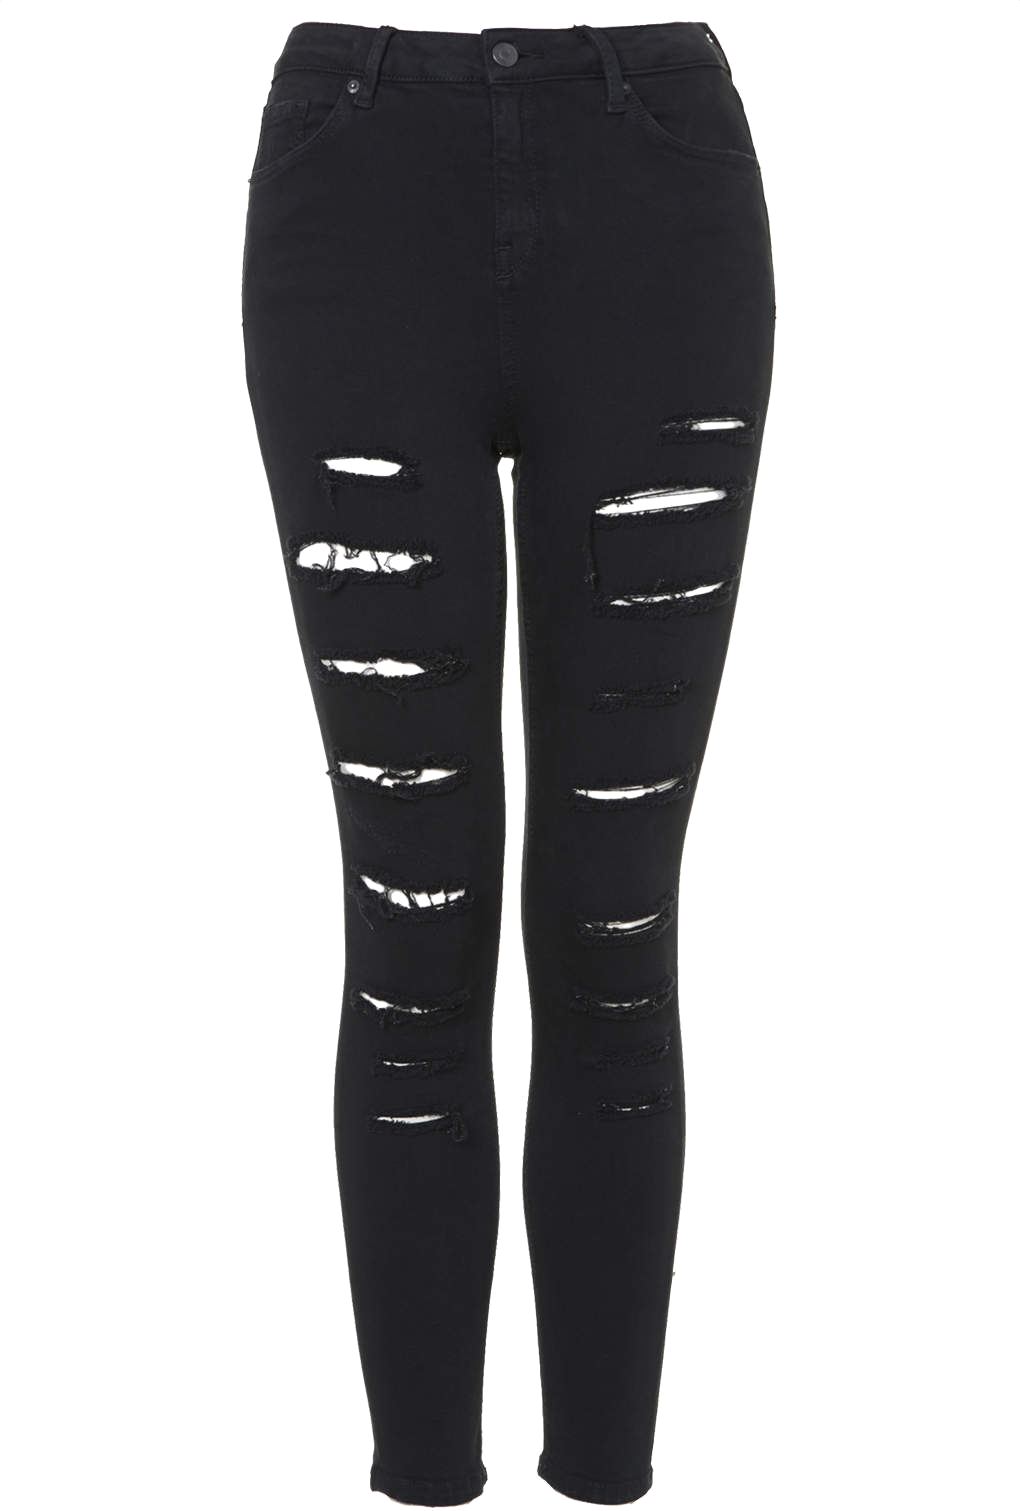 Download Jeans Topshop Leggings Trousers Download Free Image HQ PNG ...